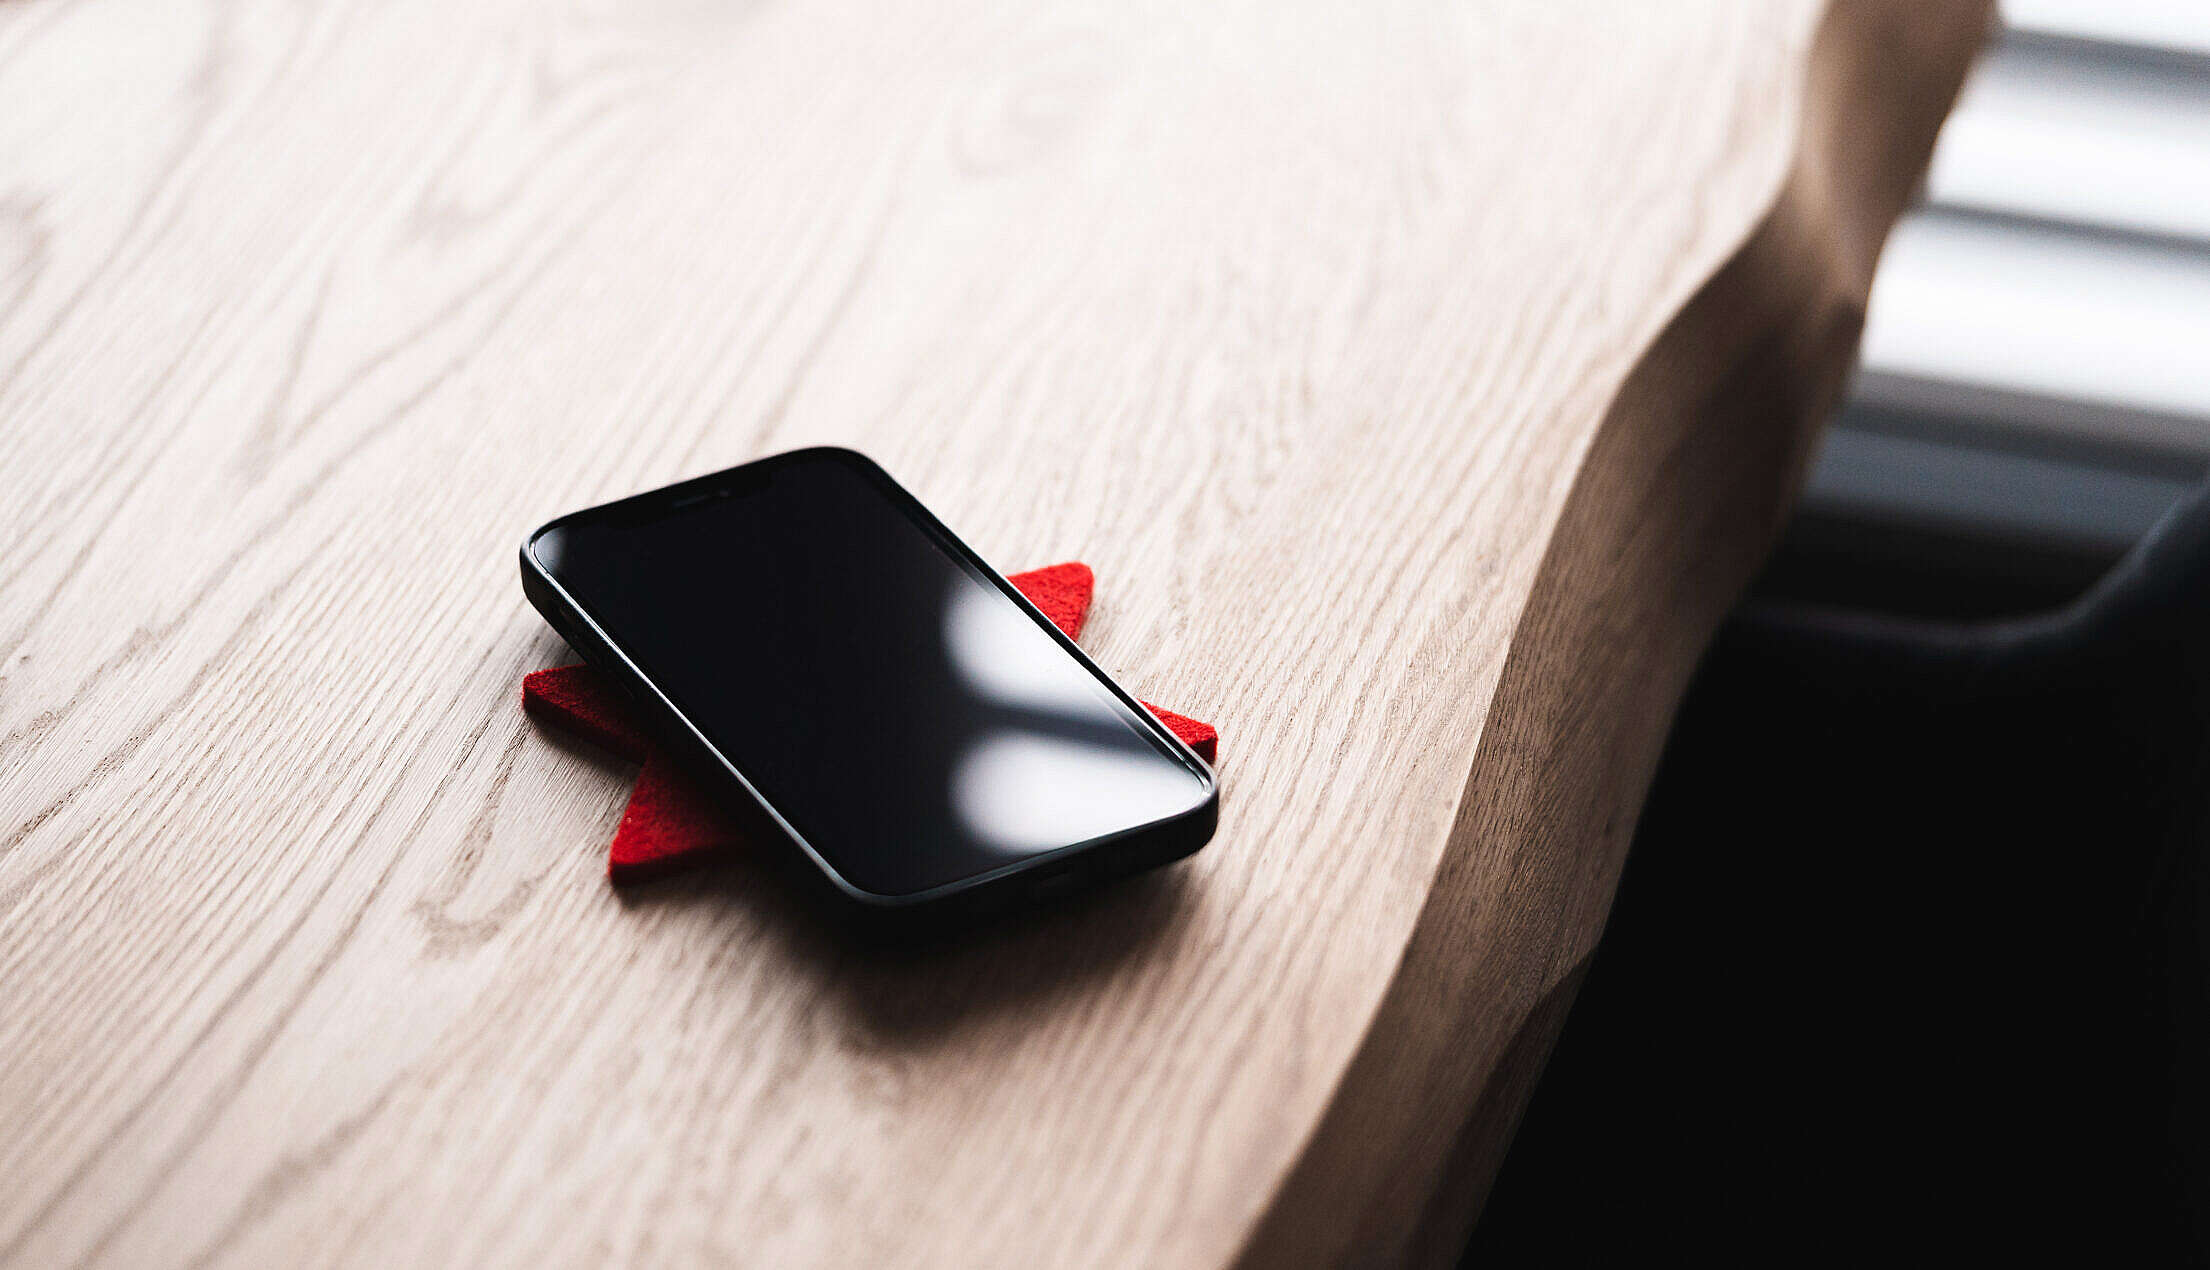 Black Smartphone Lying on a Wooden Table Free Stock Photo